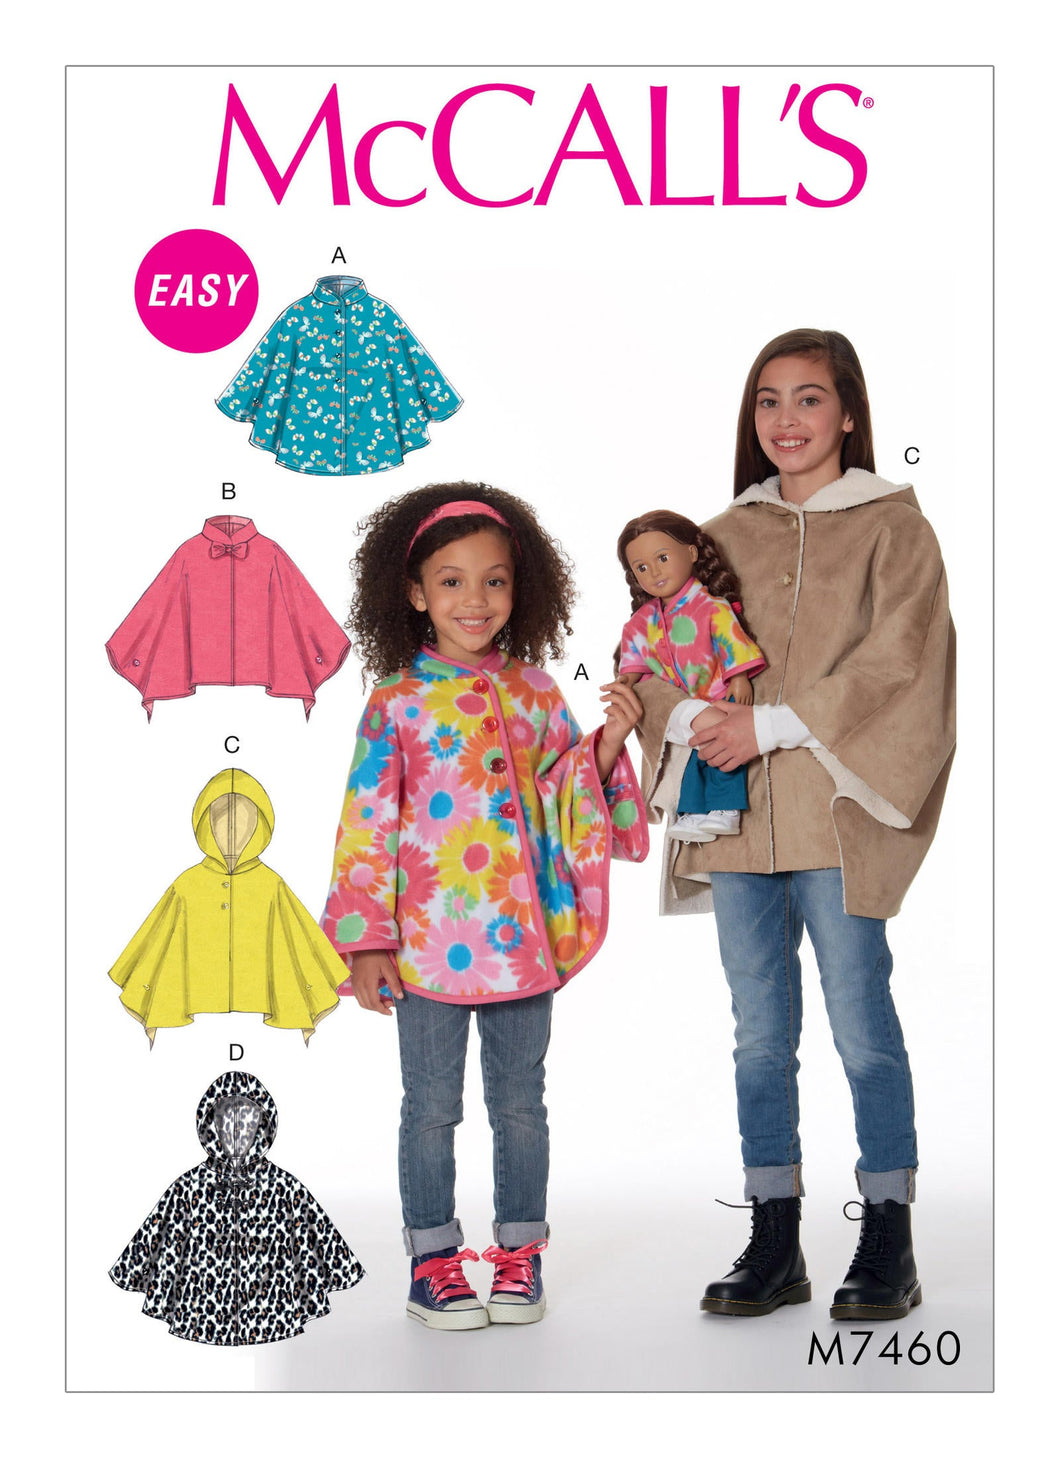 Mccalls 7460 - Childrens Poncho Sewing Pattern - Size 7-14